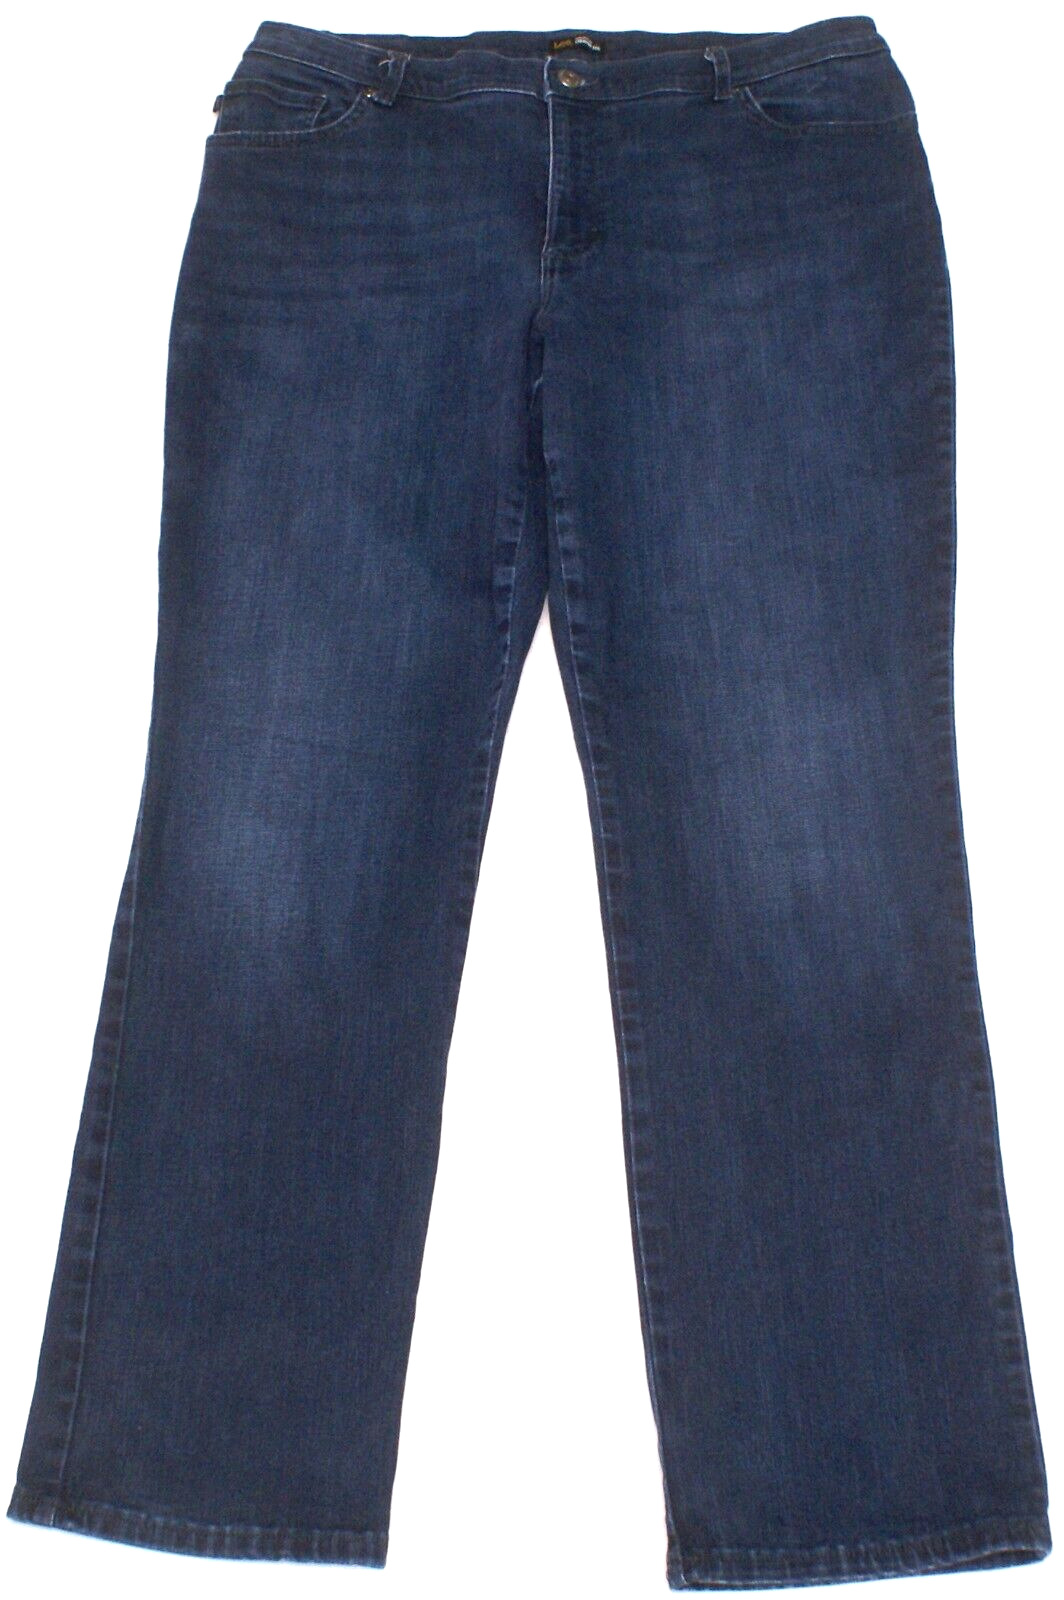 Lee Womens Relaxed Fit Straight Leg Stretch Blue Jeans Size 18 Long (38X32)